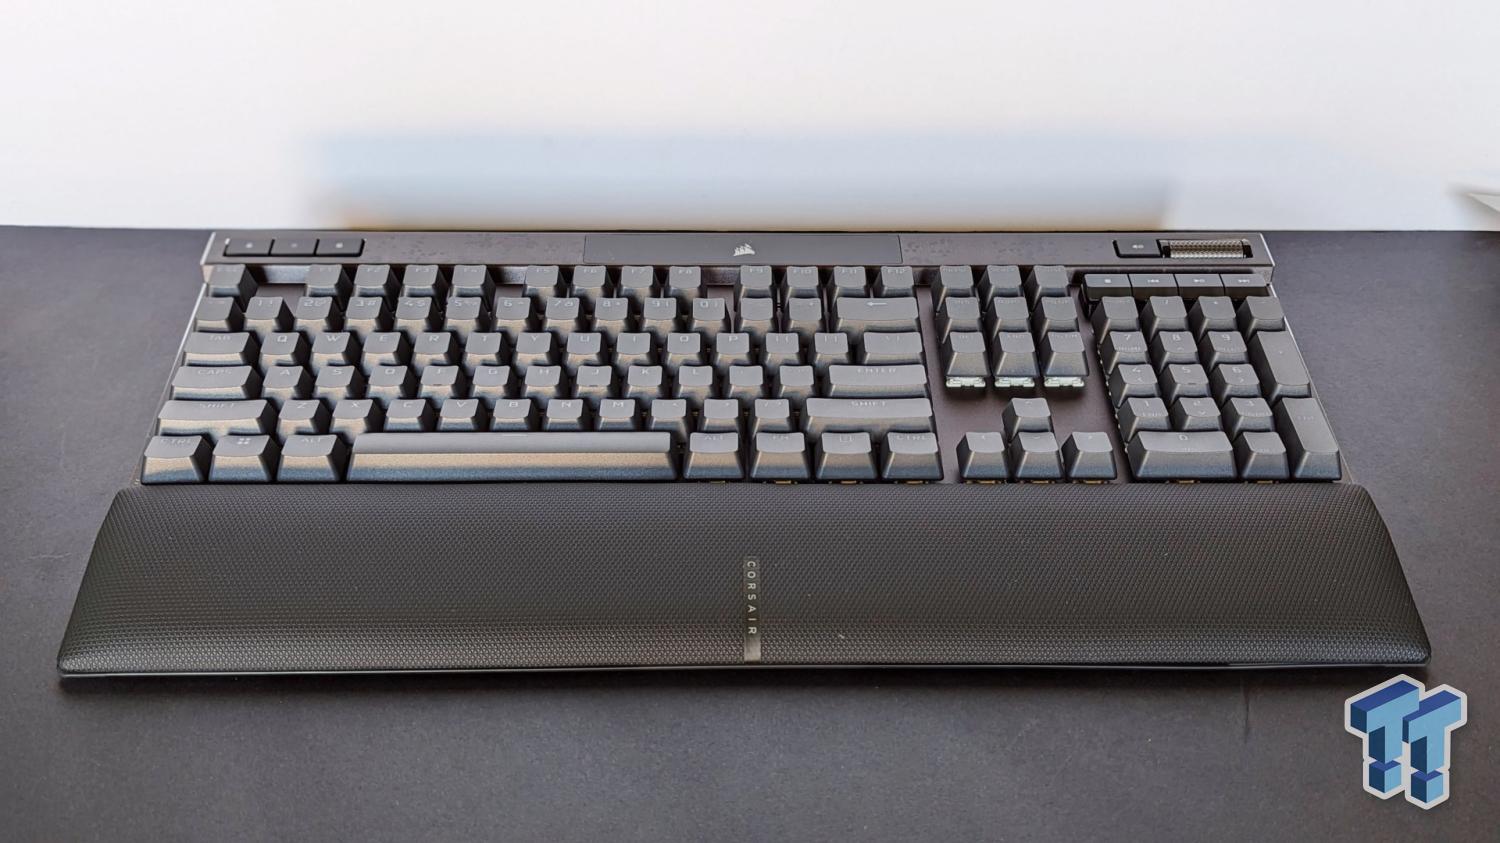 Corsair K70 Max review: Fancy magnetic switches and big